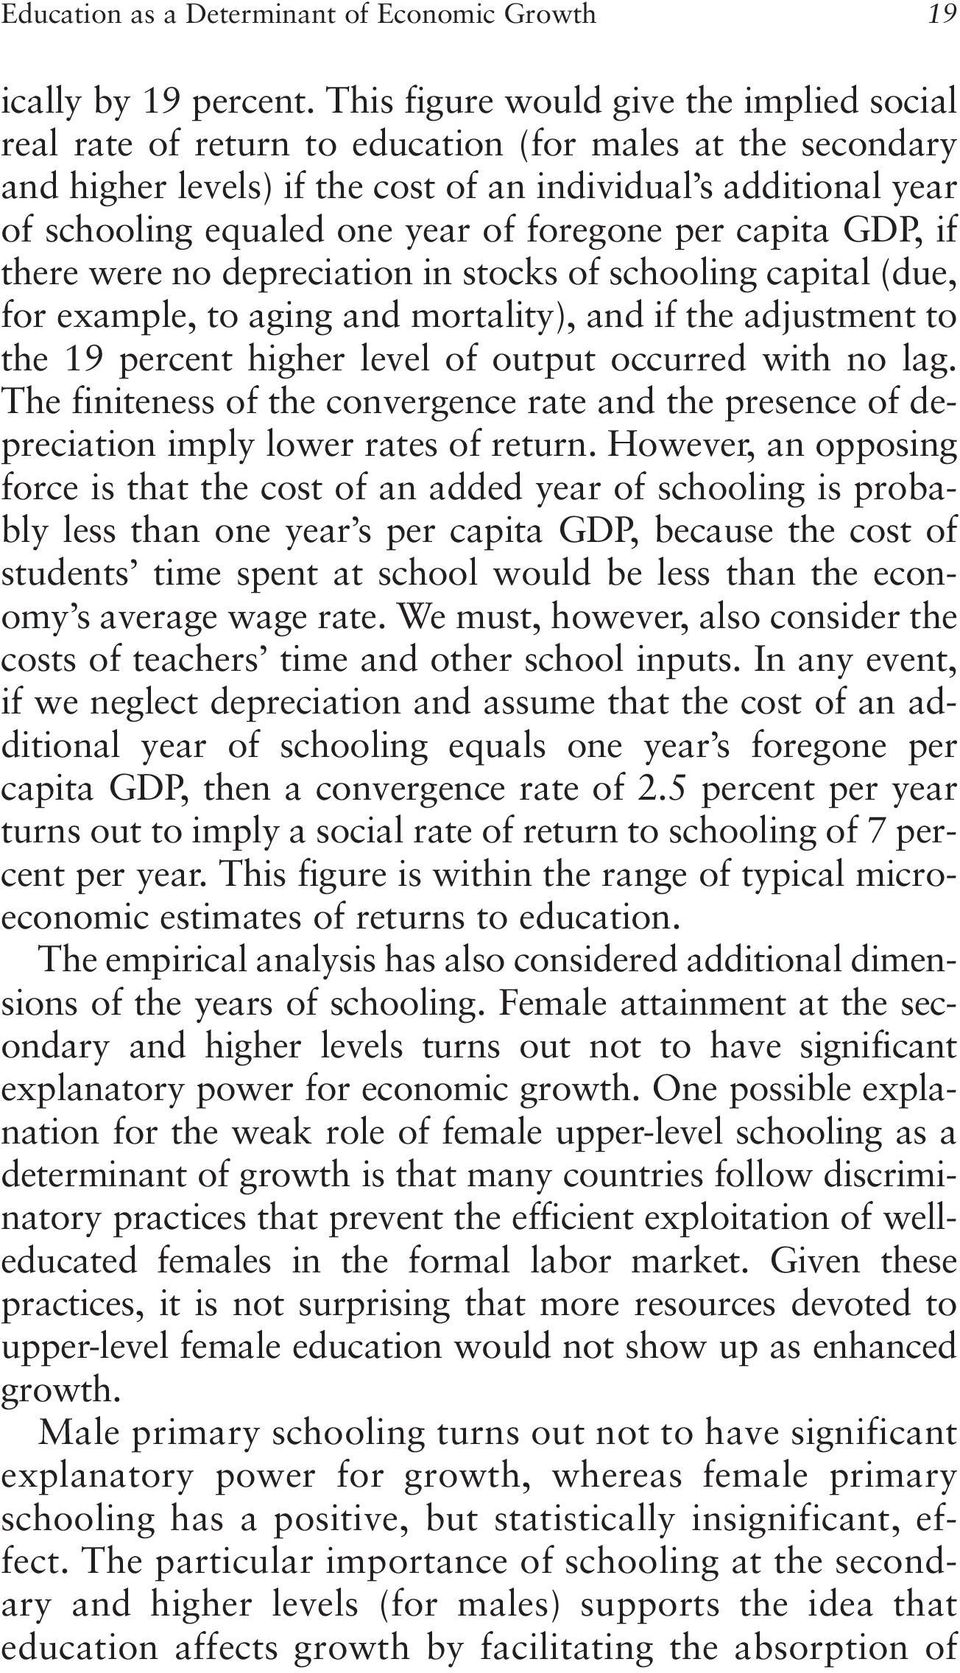 of foregone per capita GDP, if there were no depreciation in stocks of schooling capital (due, for example, to aging and mortality), and if the adjustment to the 19 percent higher level of output